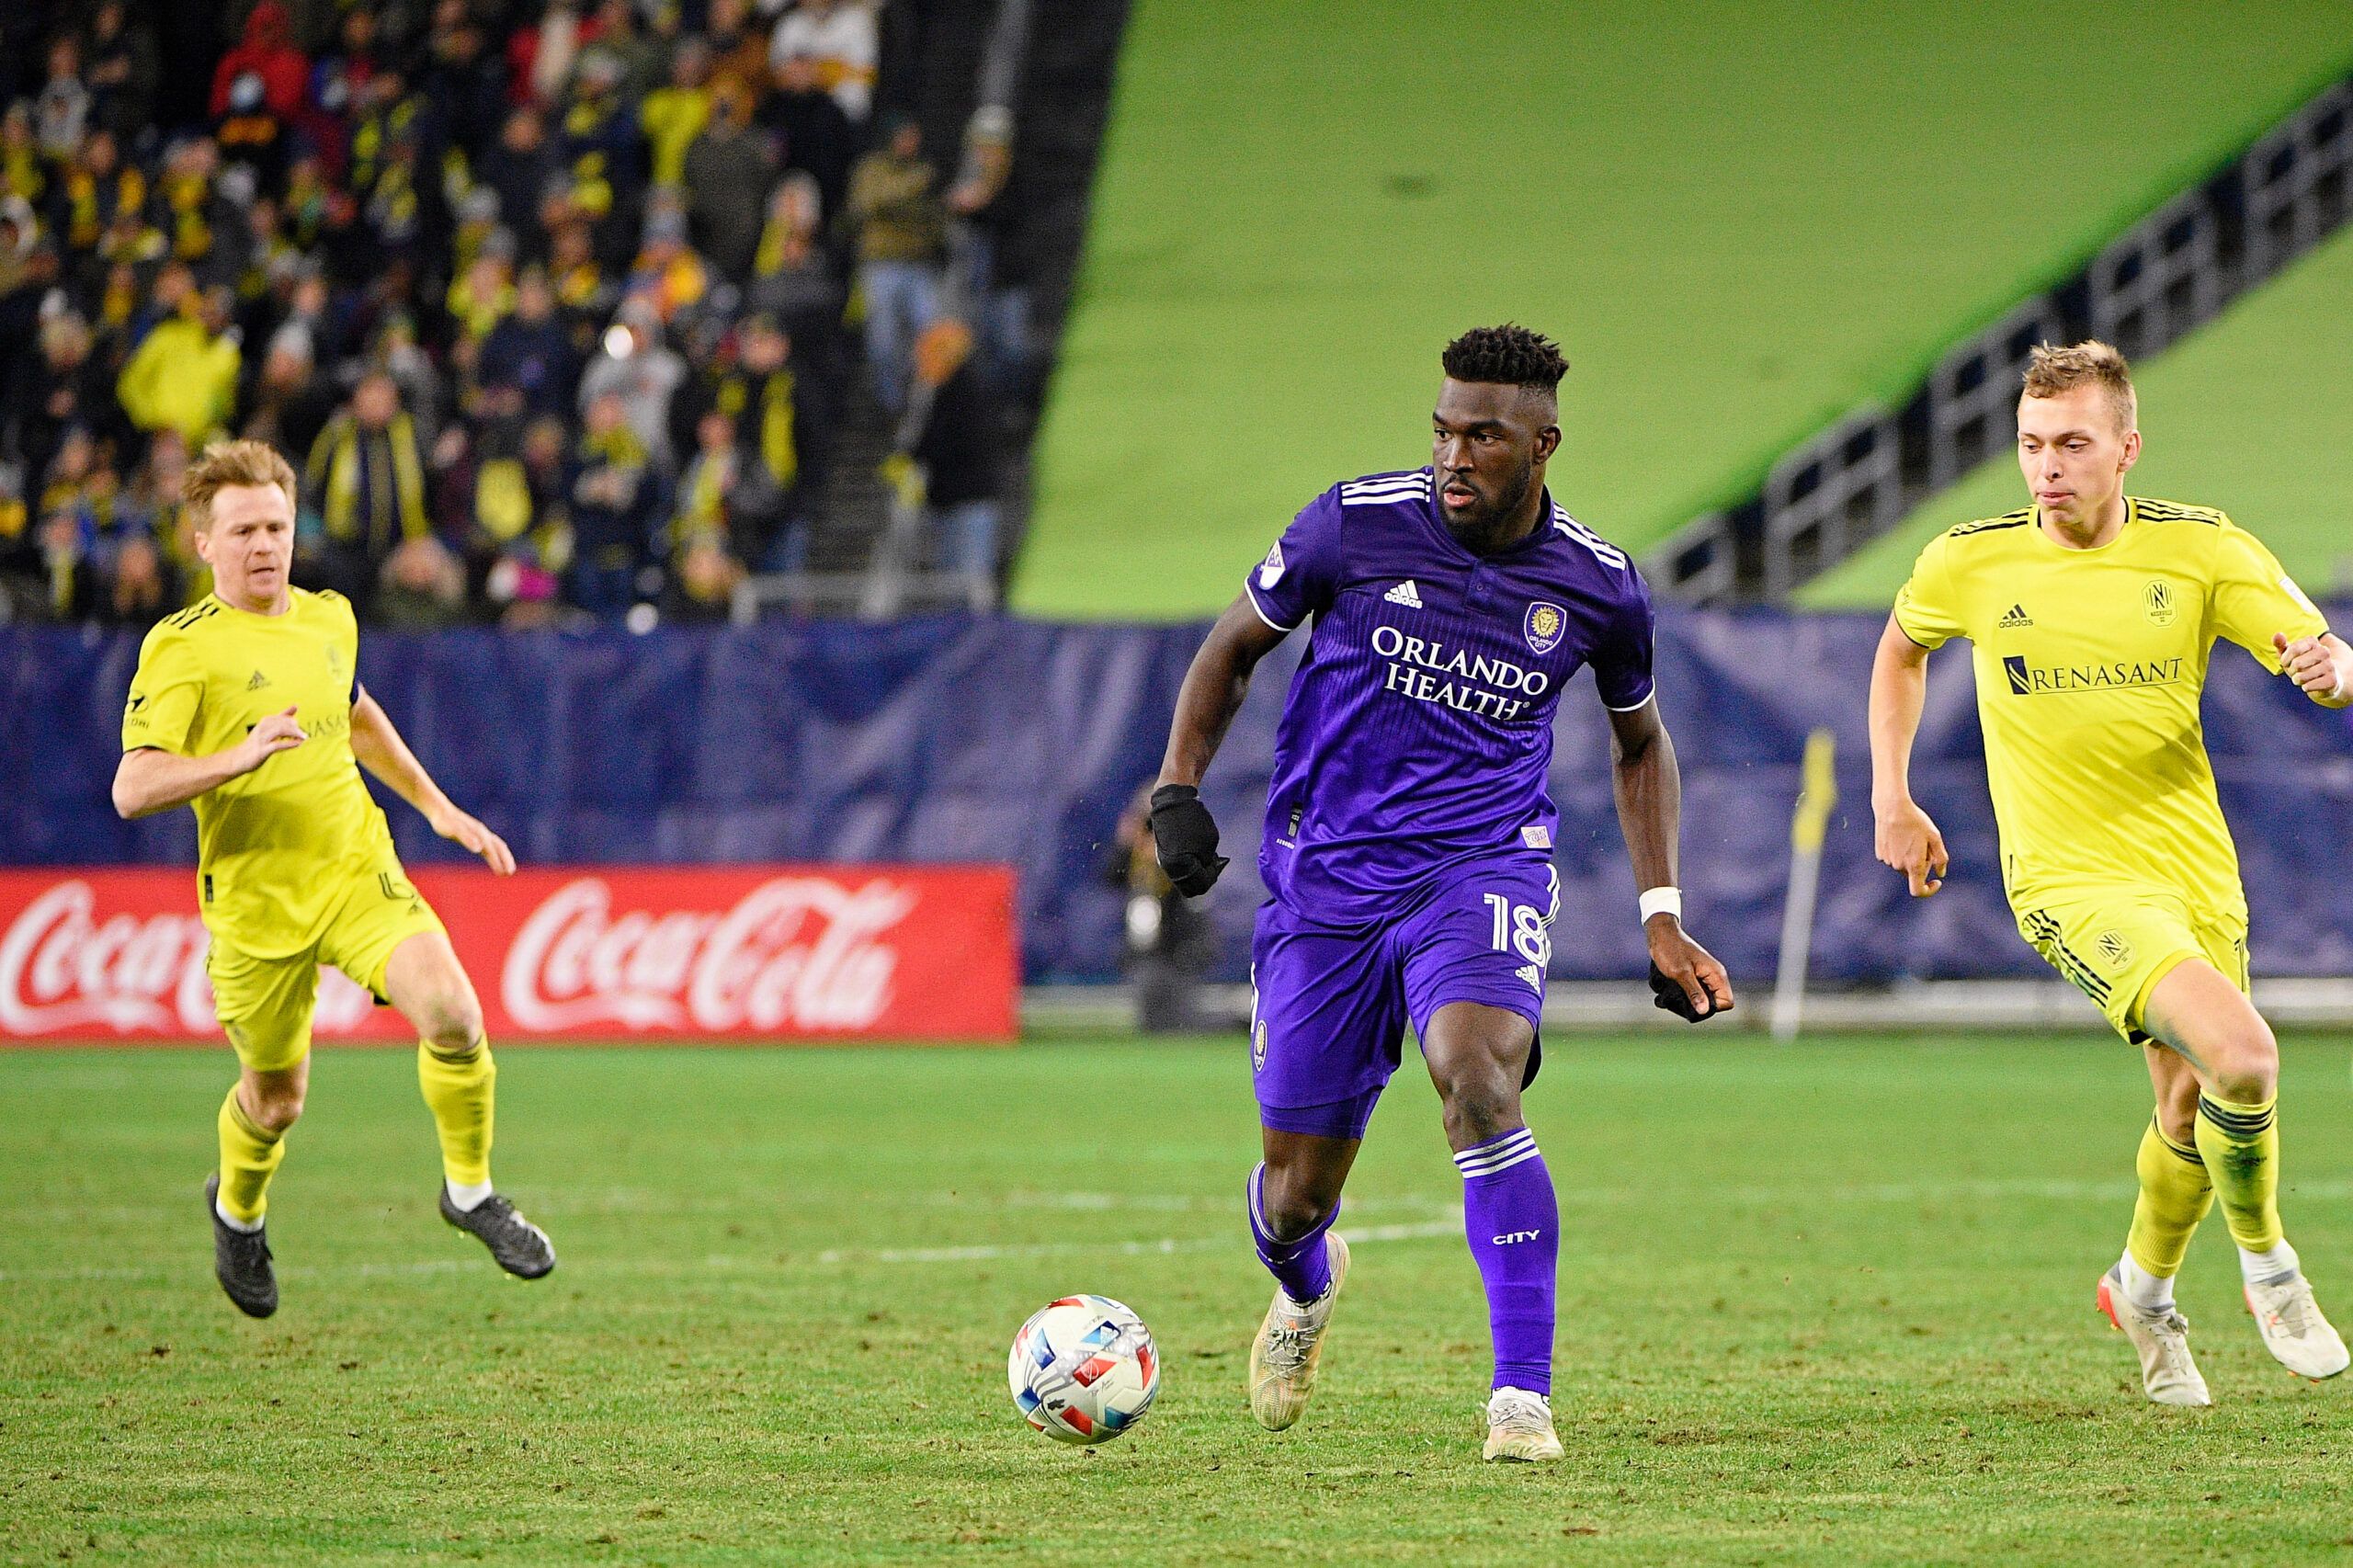 Nov 23, 2021; Nashville, TN, USA; Orlando City forward Daryl Dike (18) dribbles the ball against Nashville SC during the second half of a round one MLS Playoff game at Nissan Stadium. Mandatory Credit: Steve Roberts-USA TODAY Sports